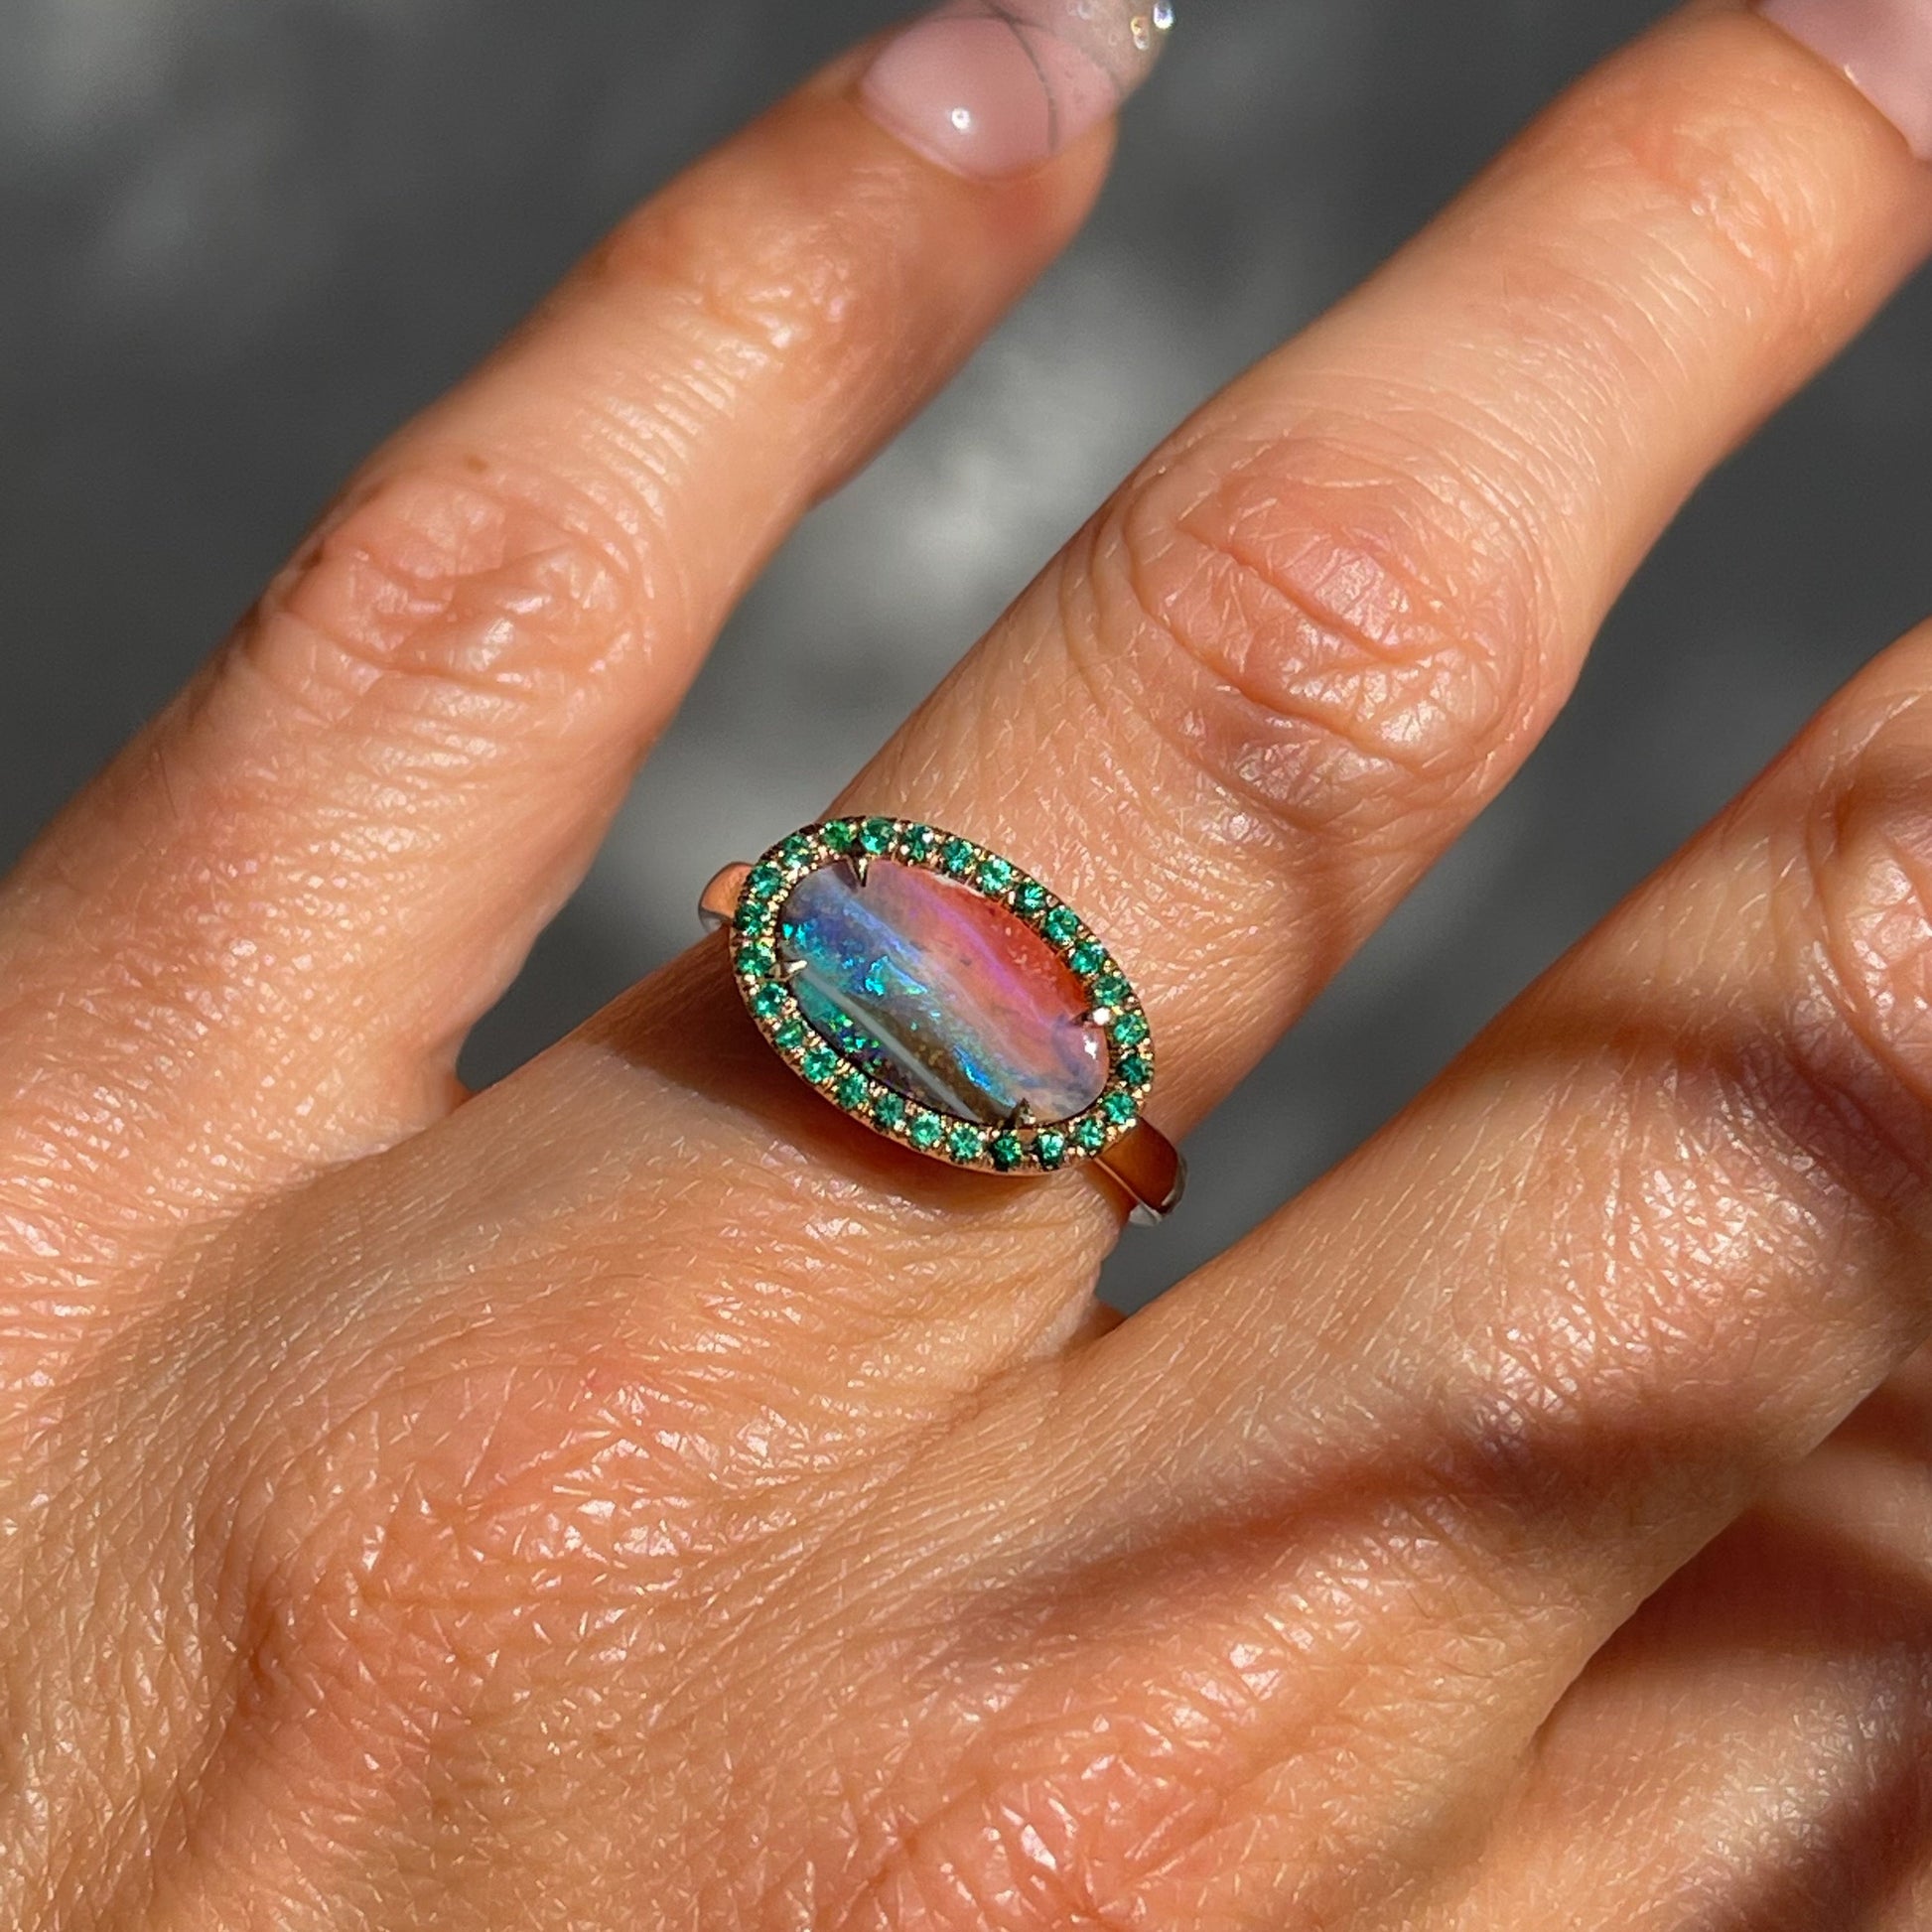 Australian Opal and Emerald Ring by NIXIN Jewelry modeled on hand. Blue and pink opal in 14k rose gold.